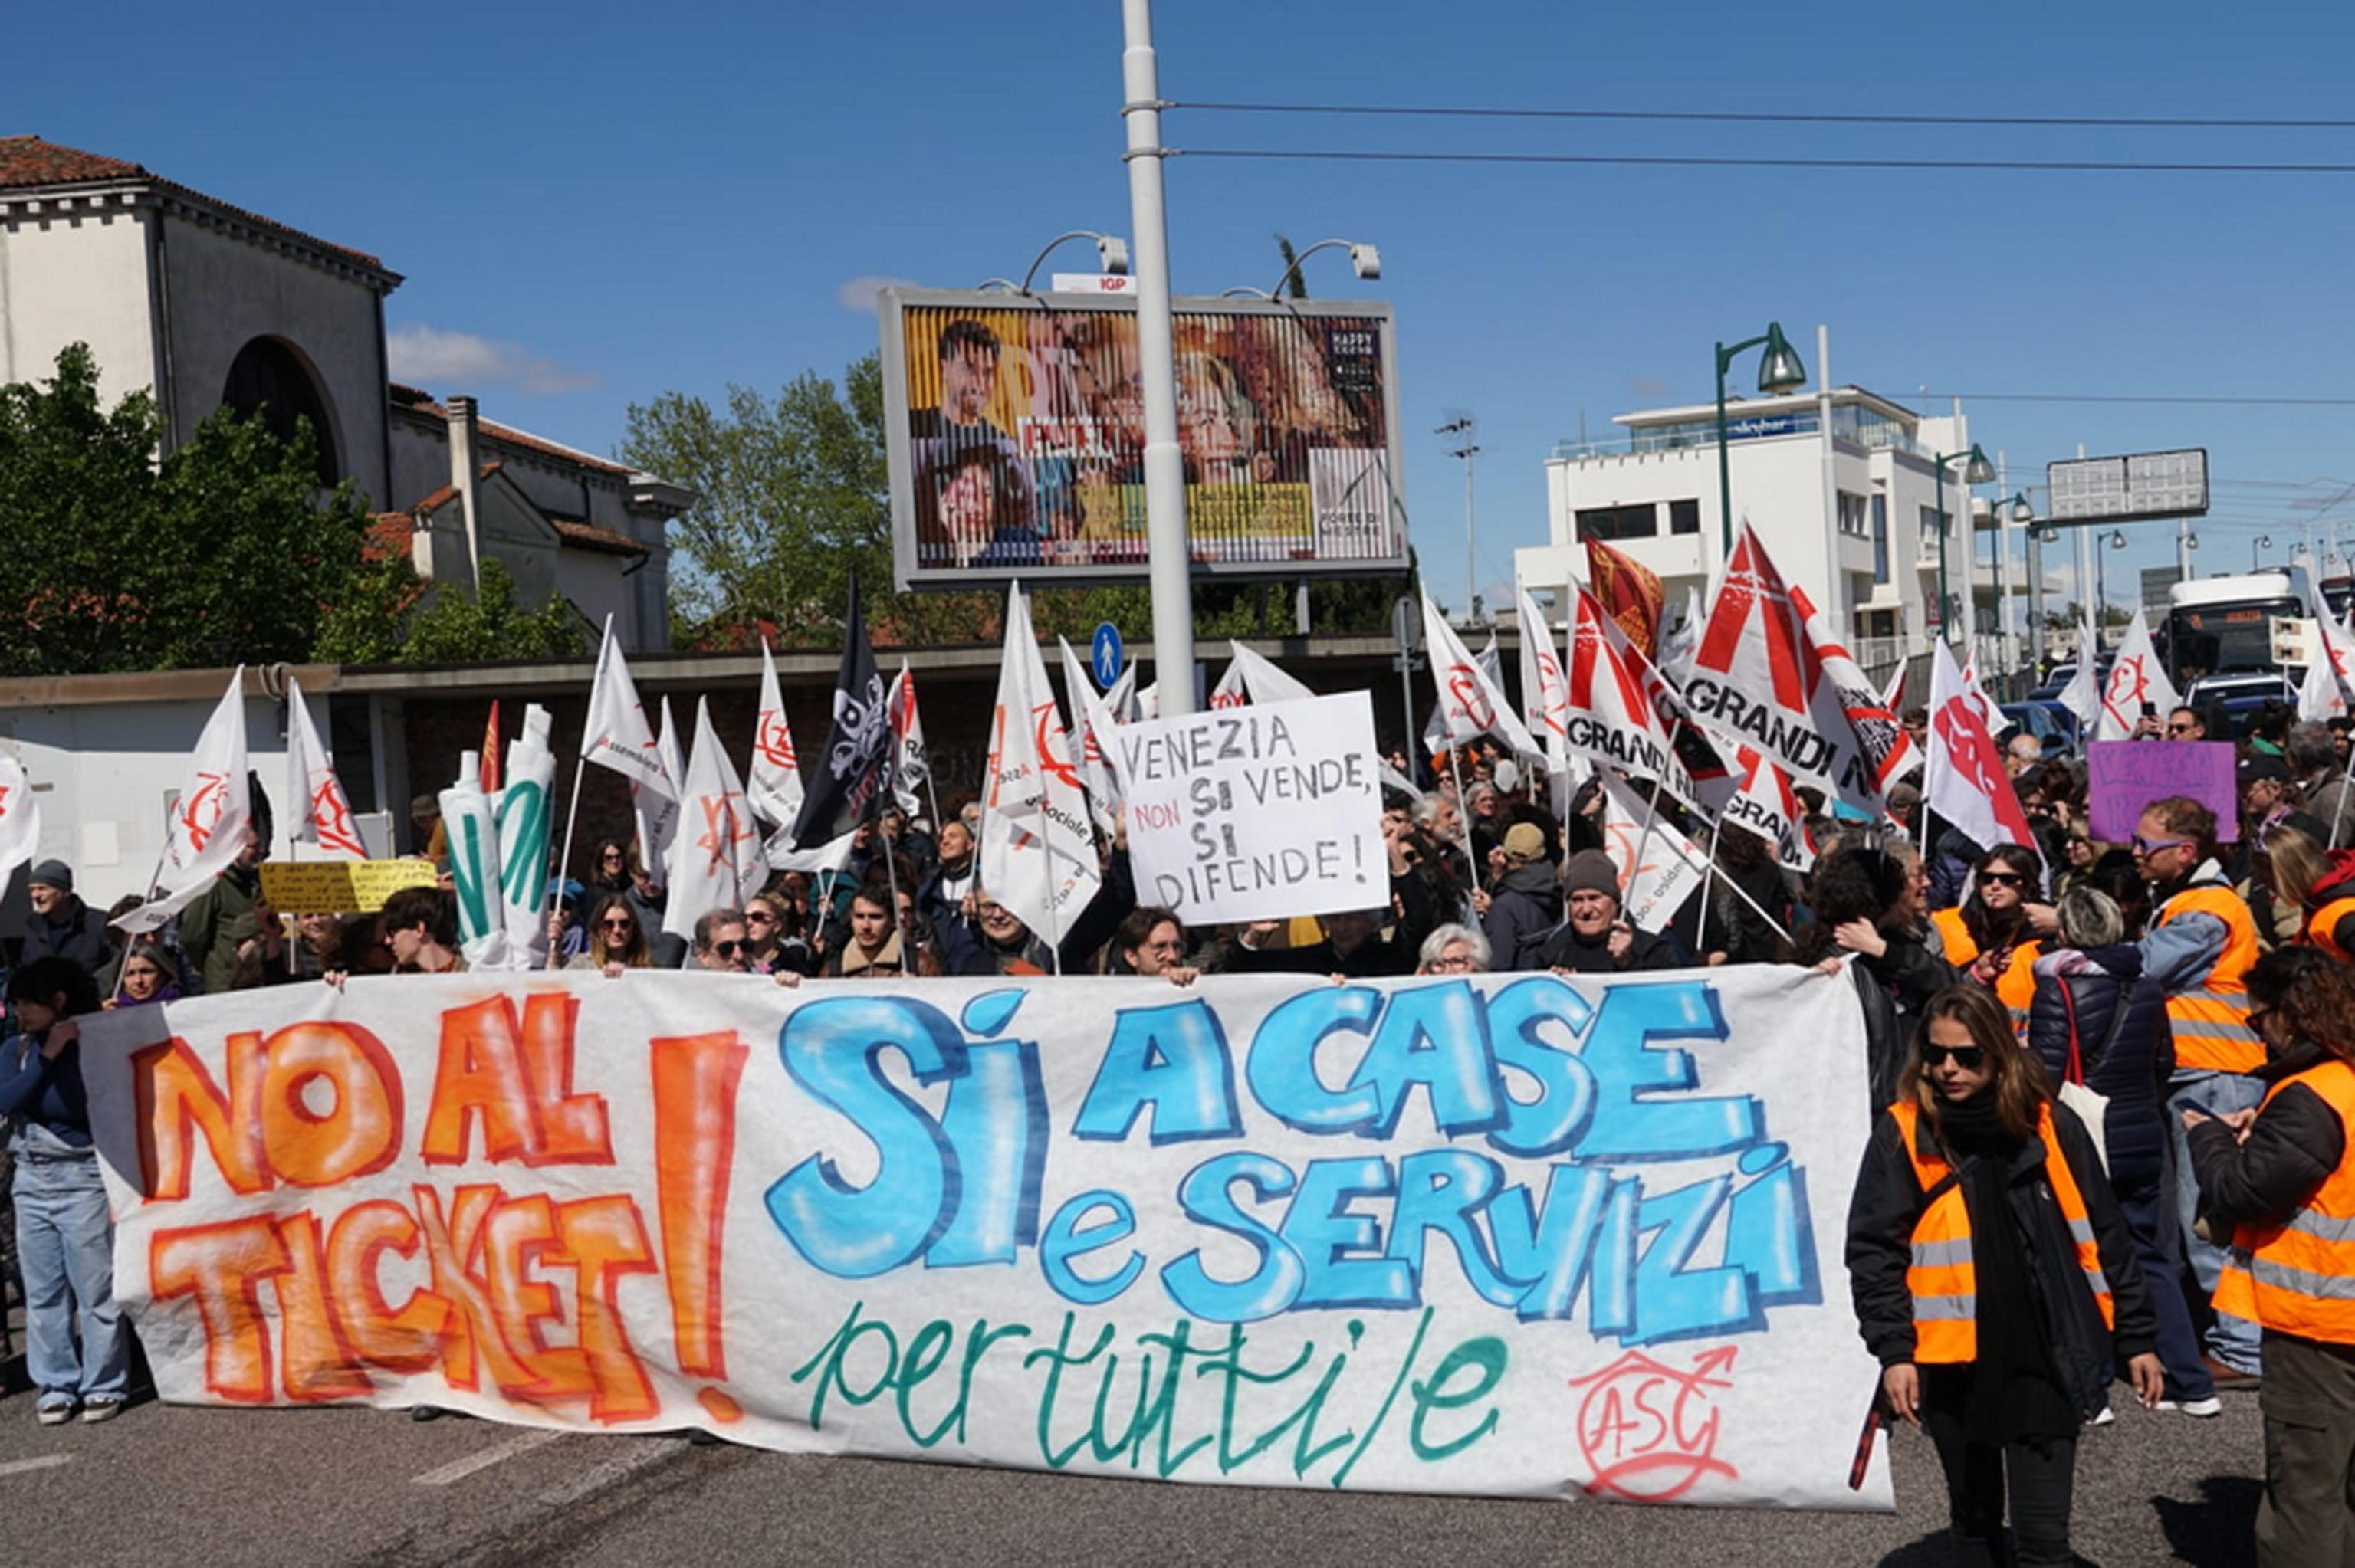 Members of social centers take part in a demonstration in Piazzale Roma against the introduction of the fee